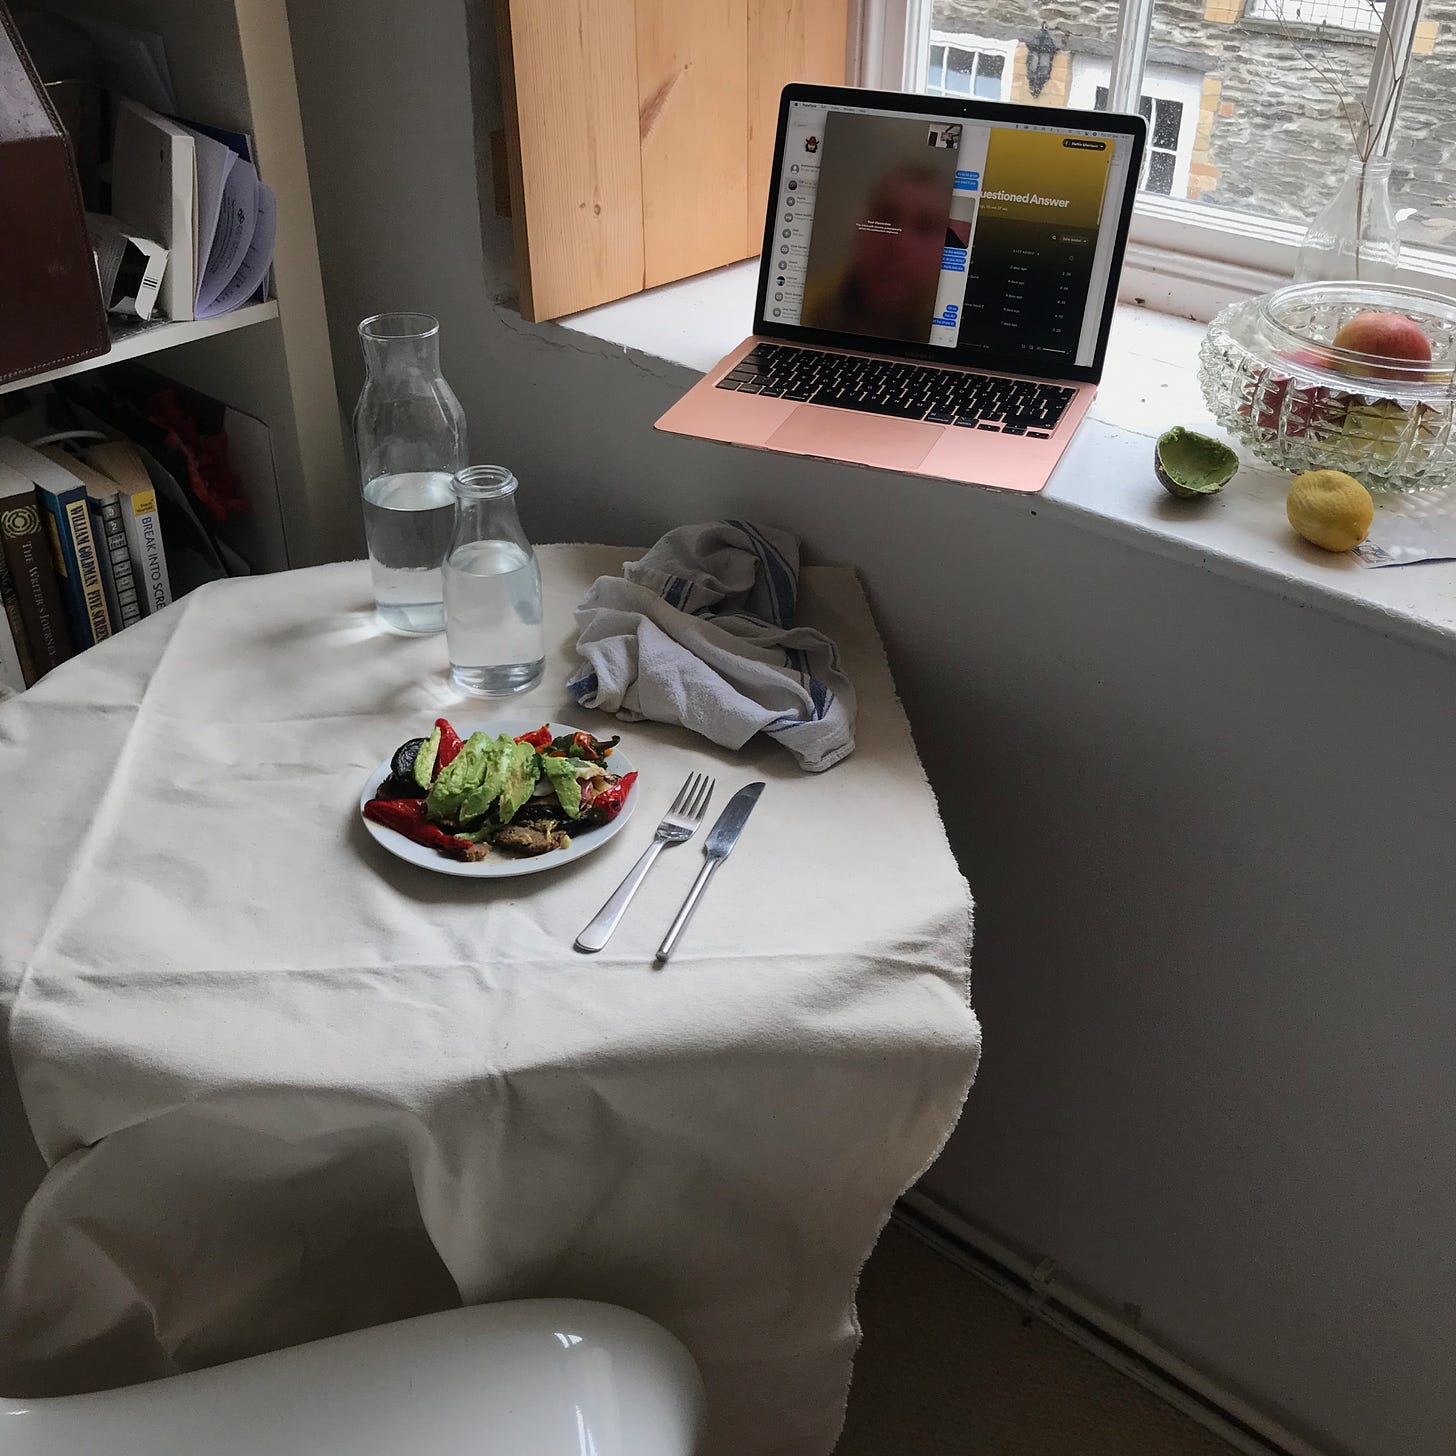 A shot of the same table, but from further back, later in the day. On the plate now are some ripe slices of avocado, more peppers, topping, jumbled over. In the background is a windowsill with a metallic pink laptop and half an avocado skin on it.  